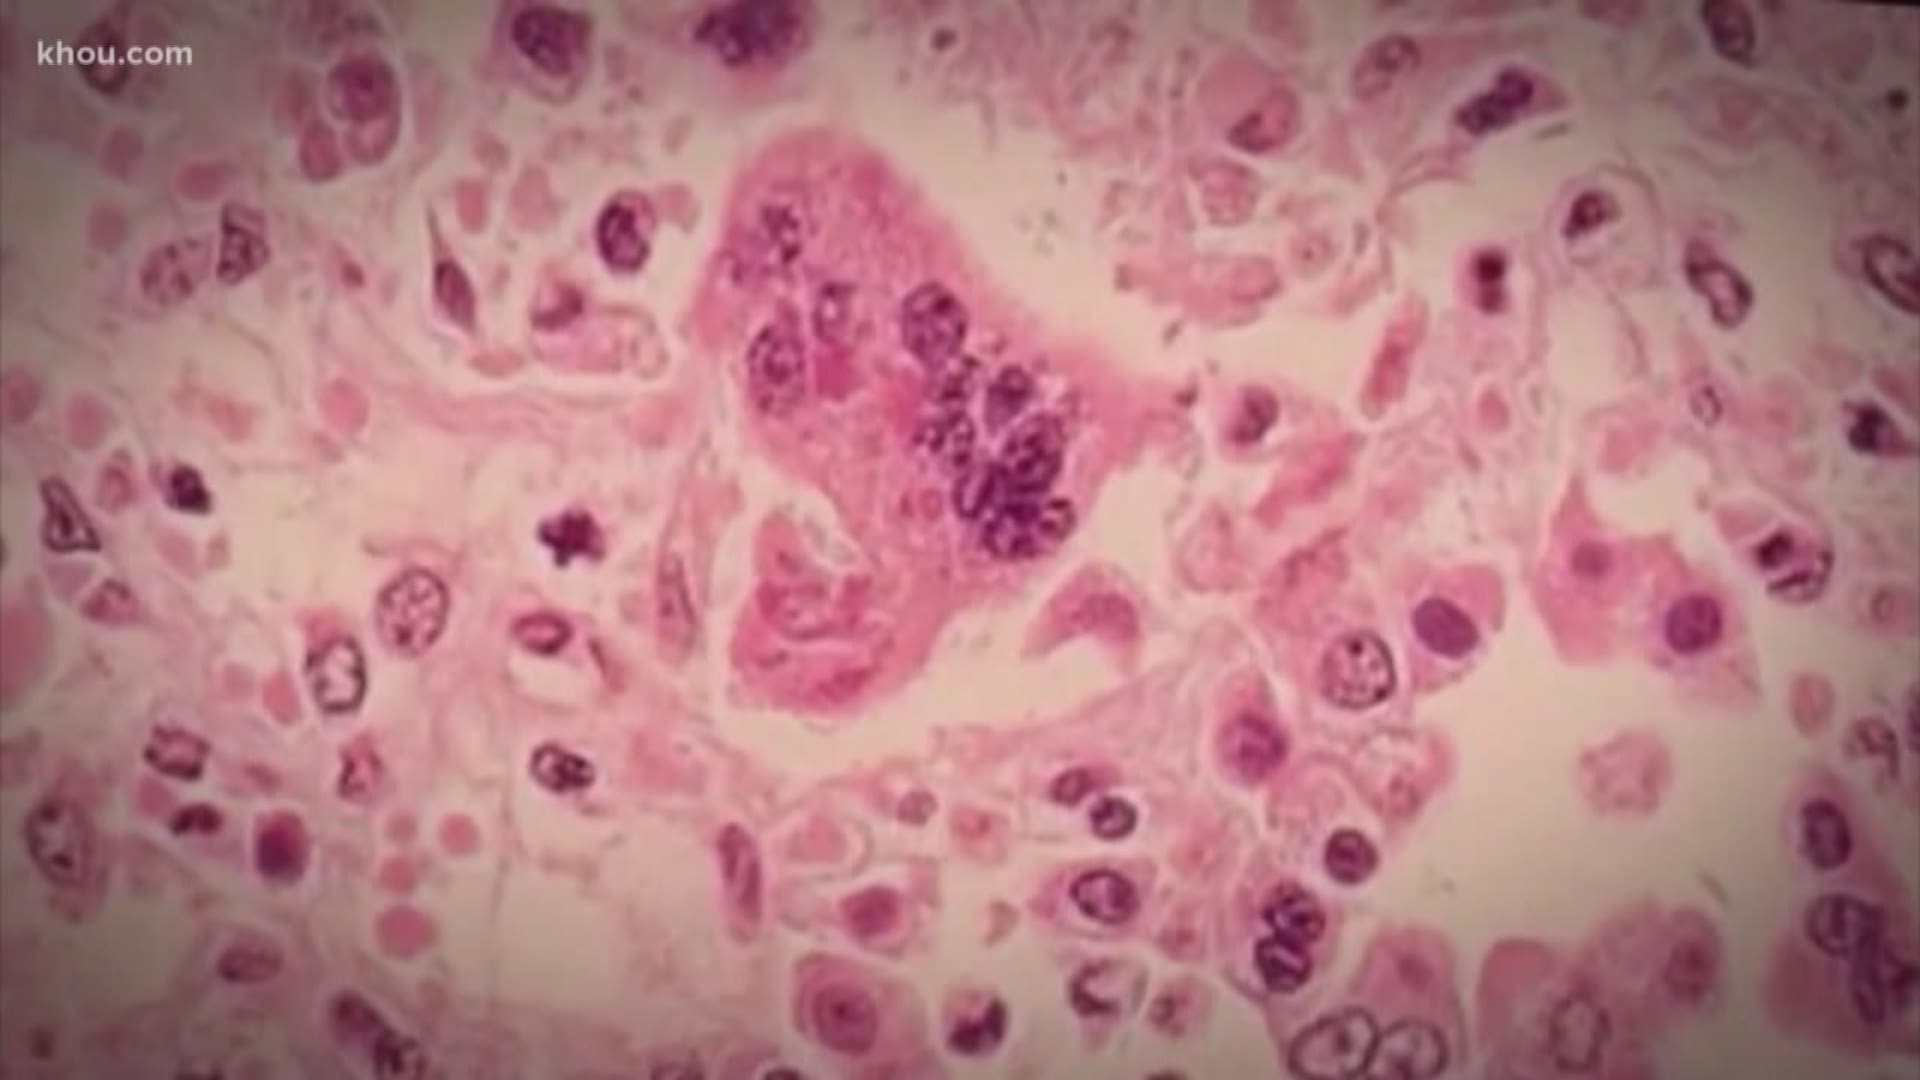 The CDC is warning that if measles transmissions continue through September, the World Health Organization could strip the U.S. of its measles elimination status.